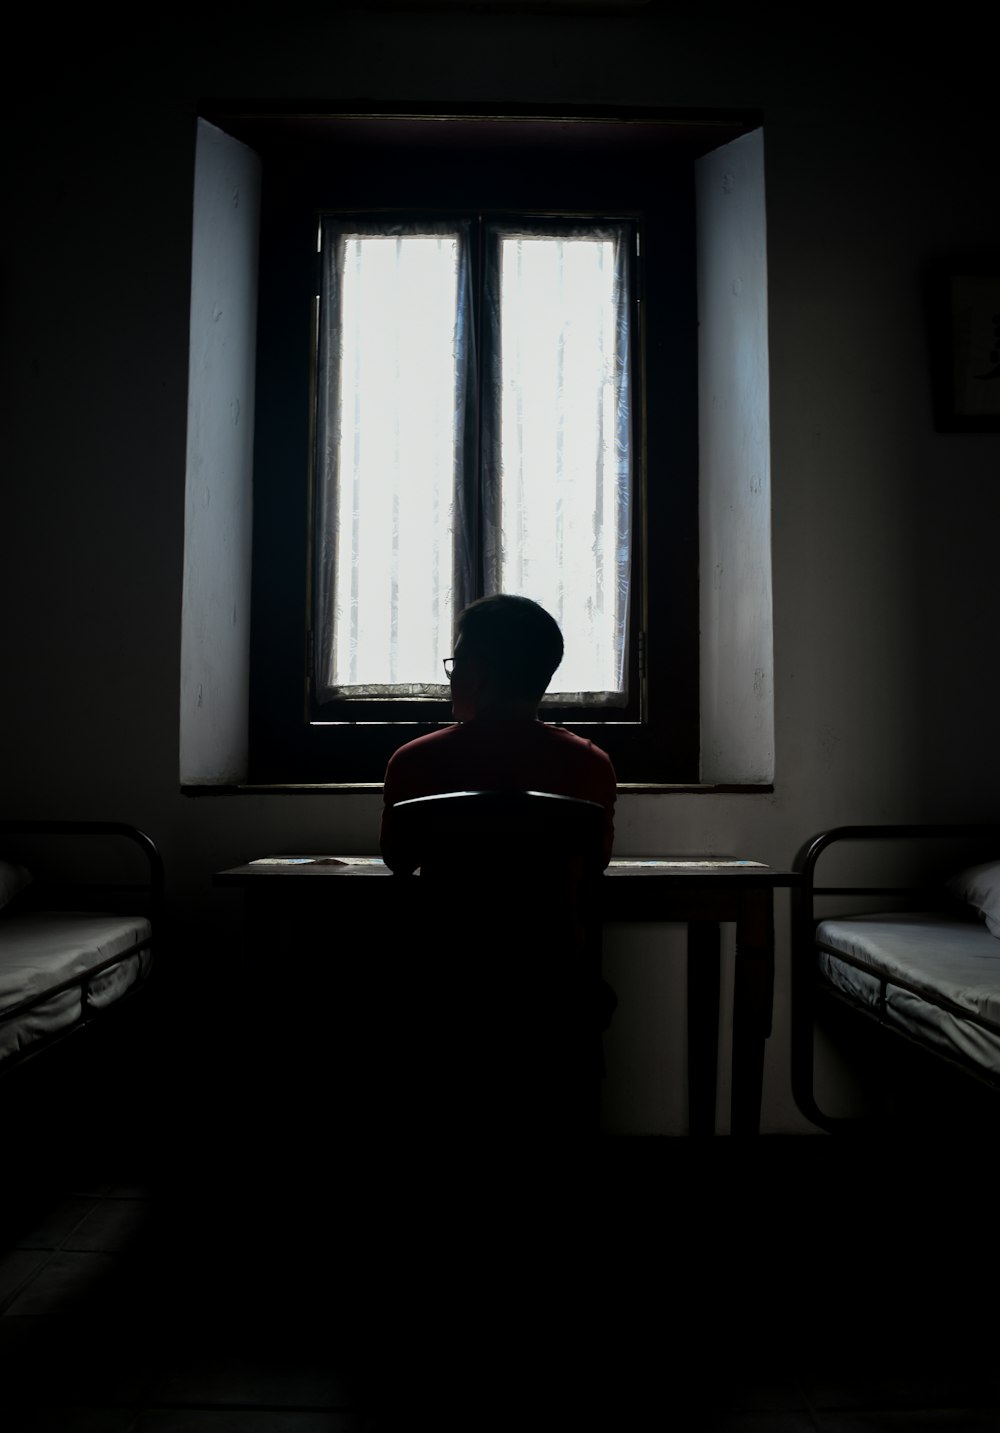 a person sitting in front of a window in a dark room